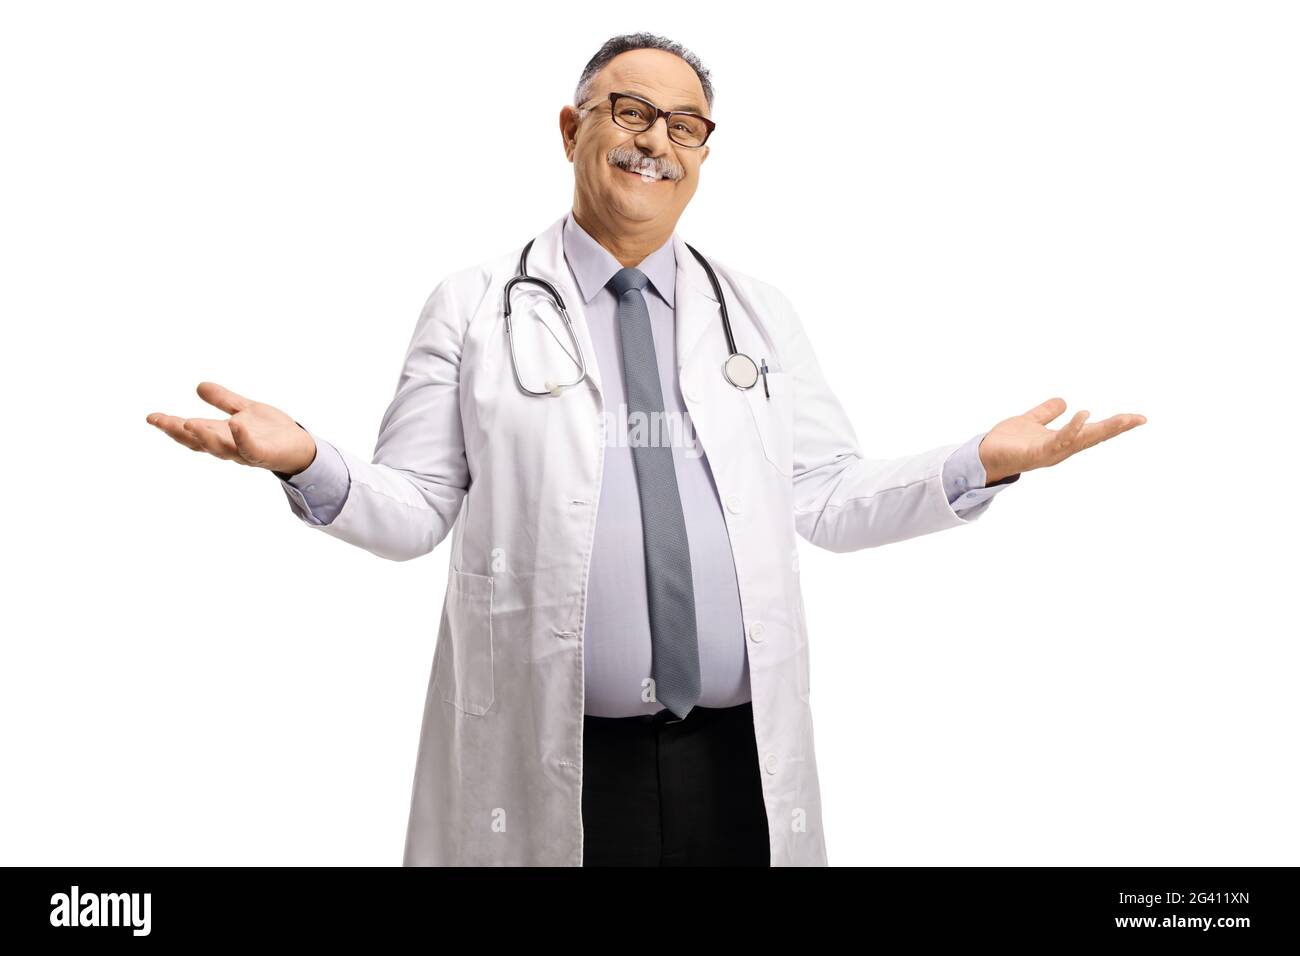 Smiling marture male doctor gesturing with hands isolated on white background Stock Photo